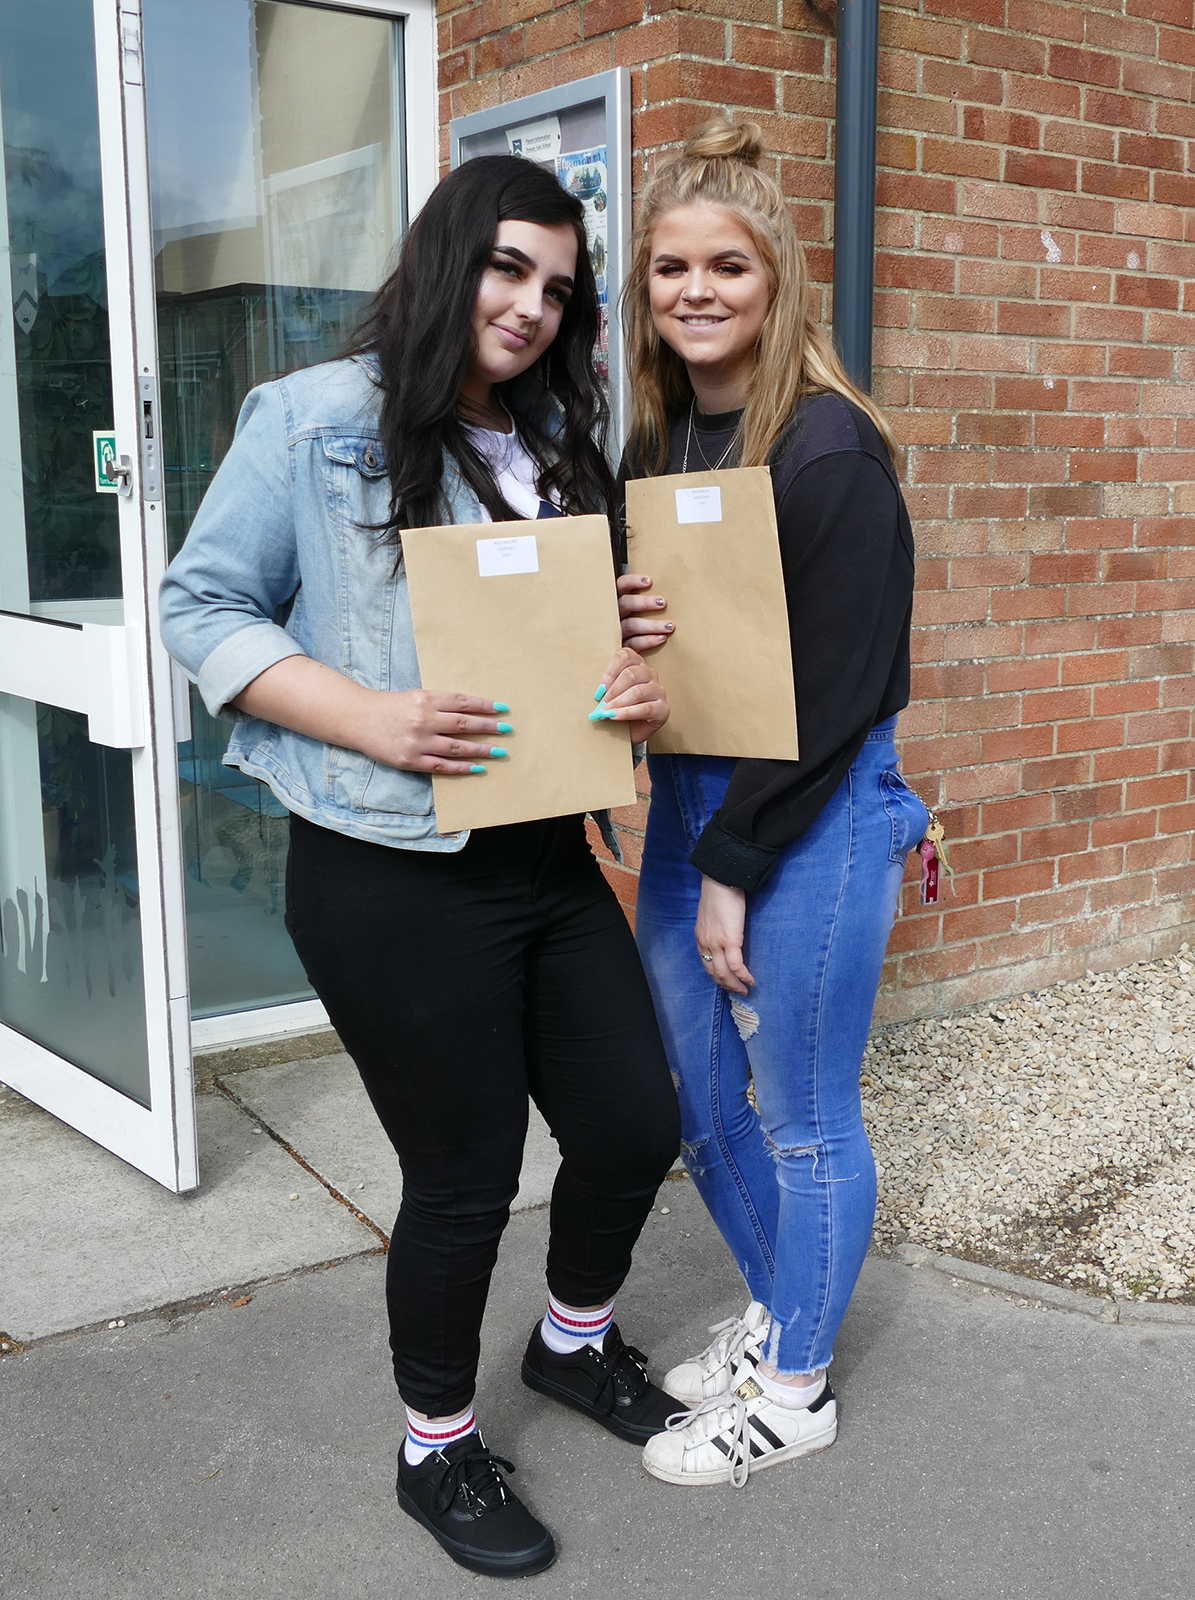 Pewsey Vale friends Chelsea Beaumont and Kayleigh Perryman celebrate their success which gains them places at New College Swindon